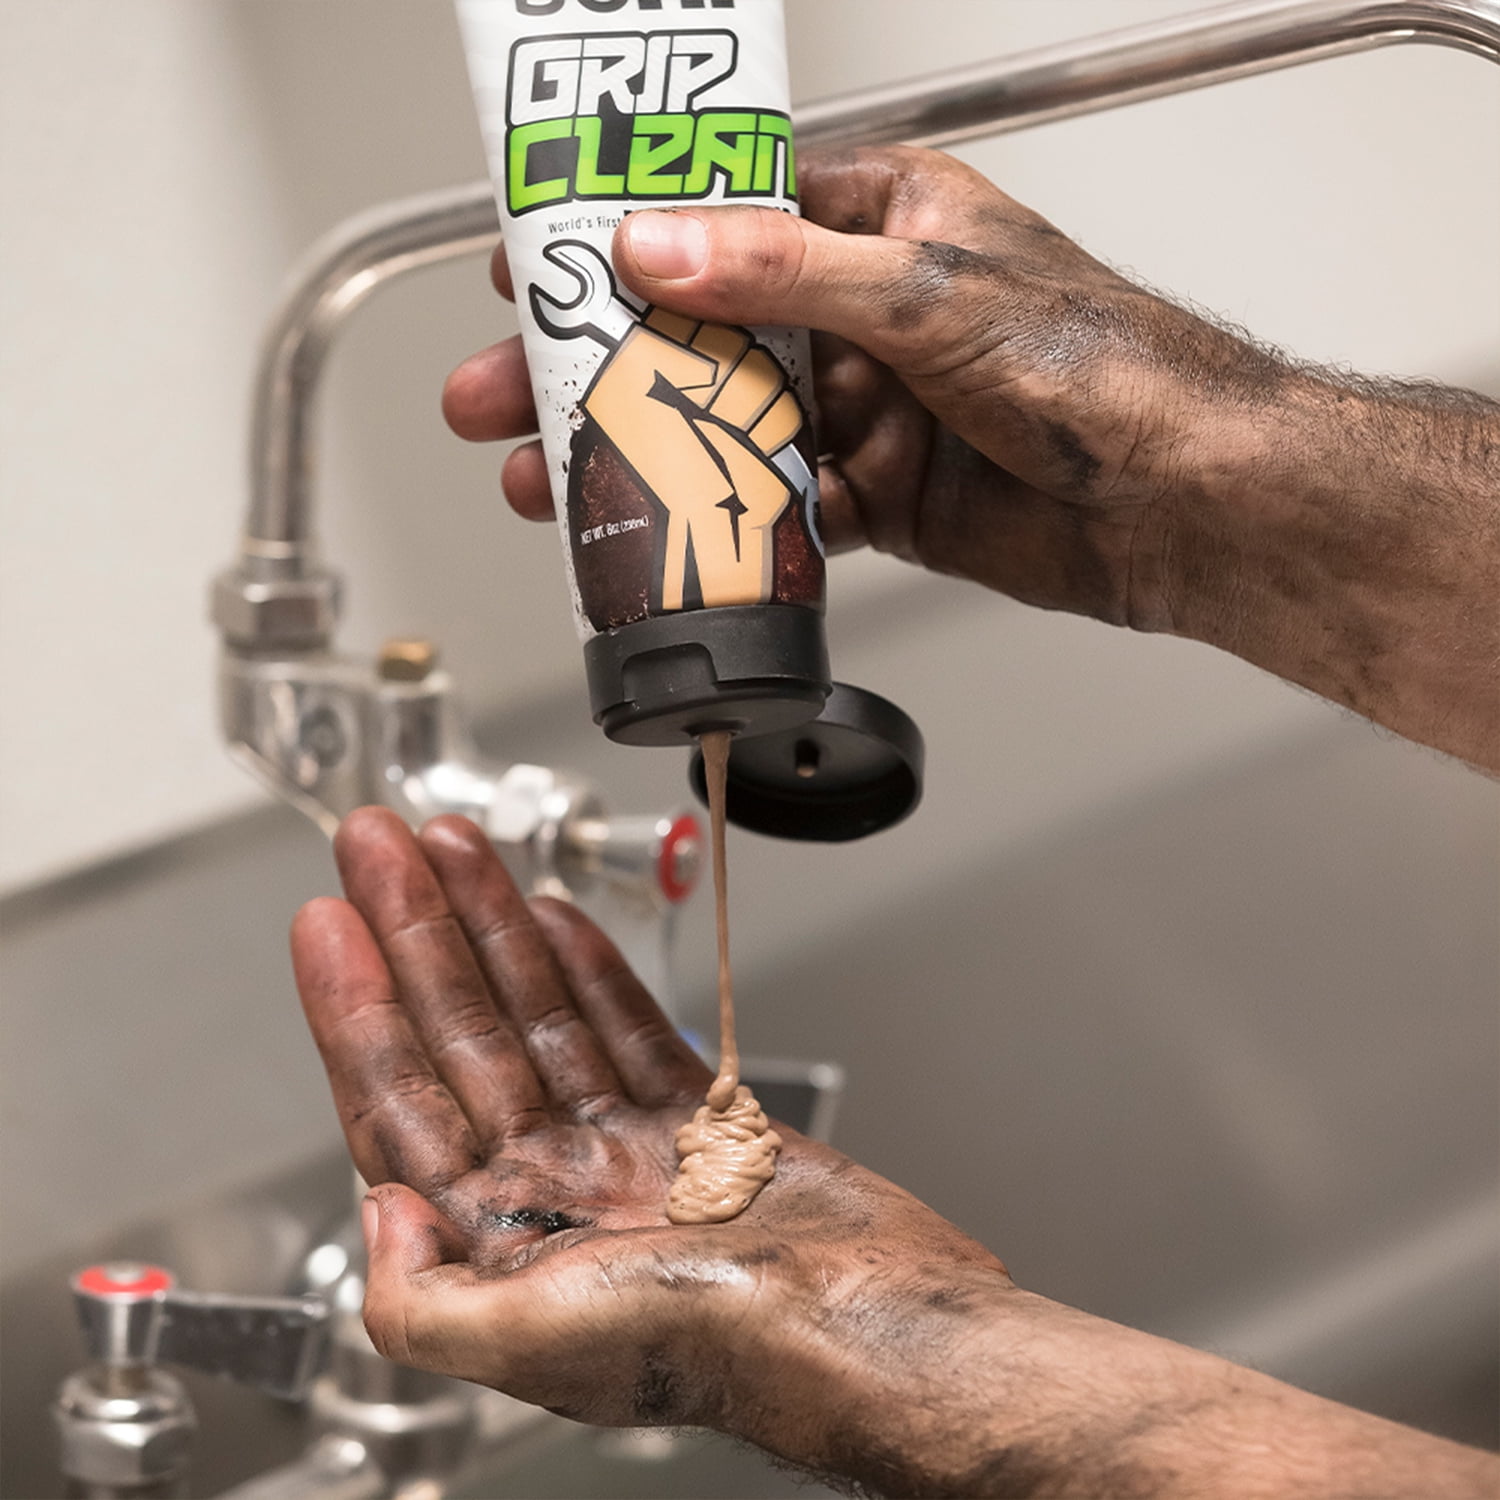  Grip Clean  Degreaser Hand Cleaner for Auto Mechanics -  Dirt-Infused Liquid Hand Soap Absorbs Grease, Oil, & Odors. Natural Heavy  Duty Pumice Soap with Moisturizing Ingredients. Lime Scented. : Everything